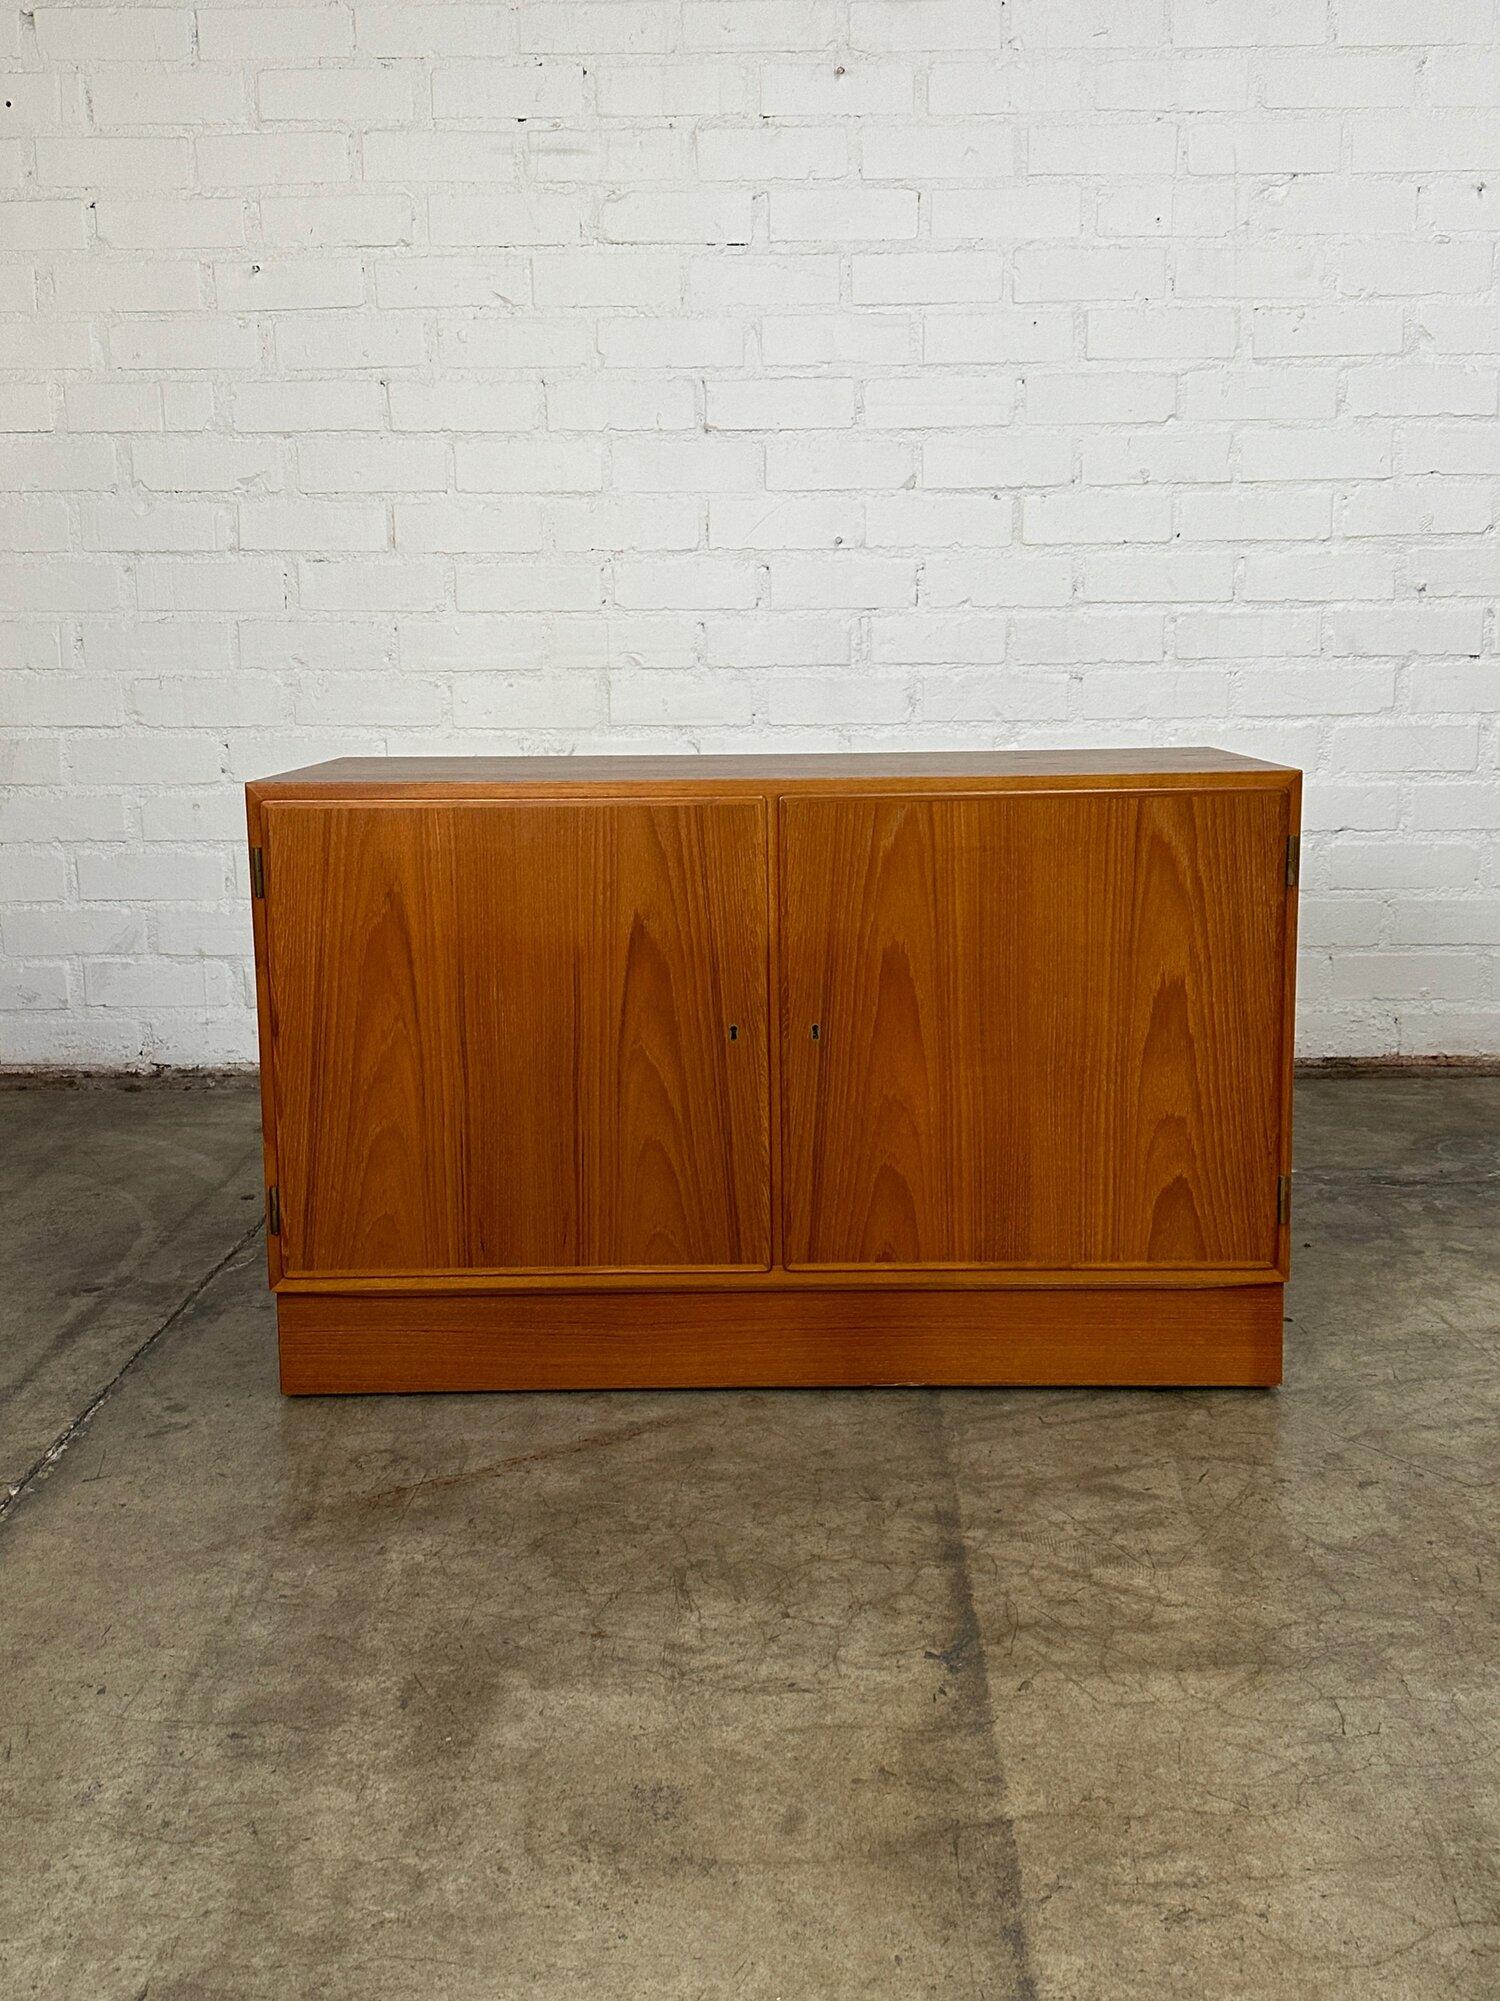 W58.25 D18 H31.25

Vintage teak credenza in great original condition. This Danish modern cabinet comes with one key. Unit is structurally sound and fully functional. Item has no major wear, credenza does show some light sun fading.